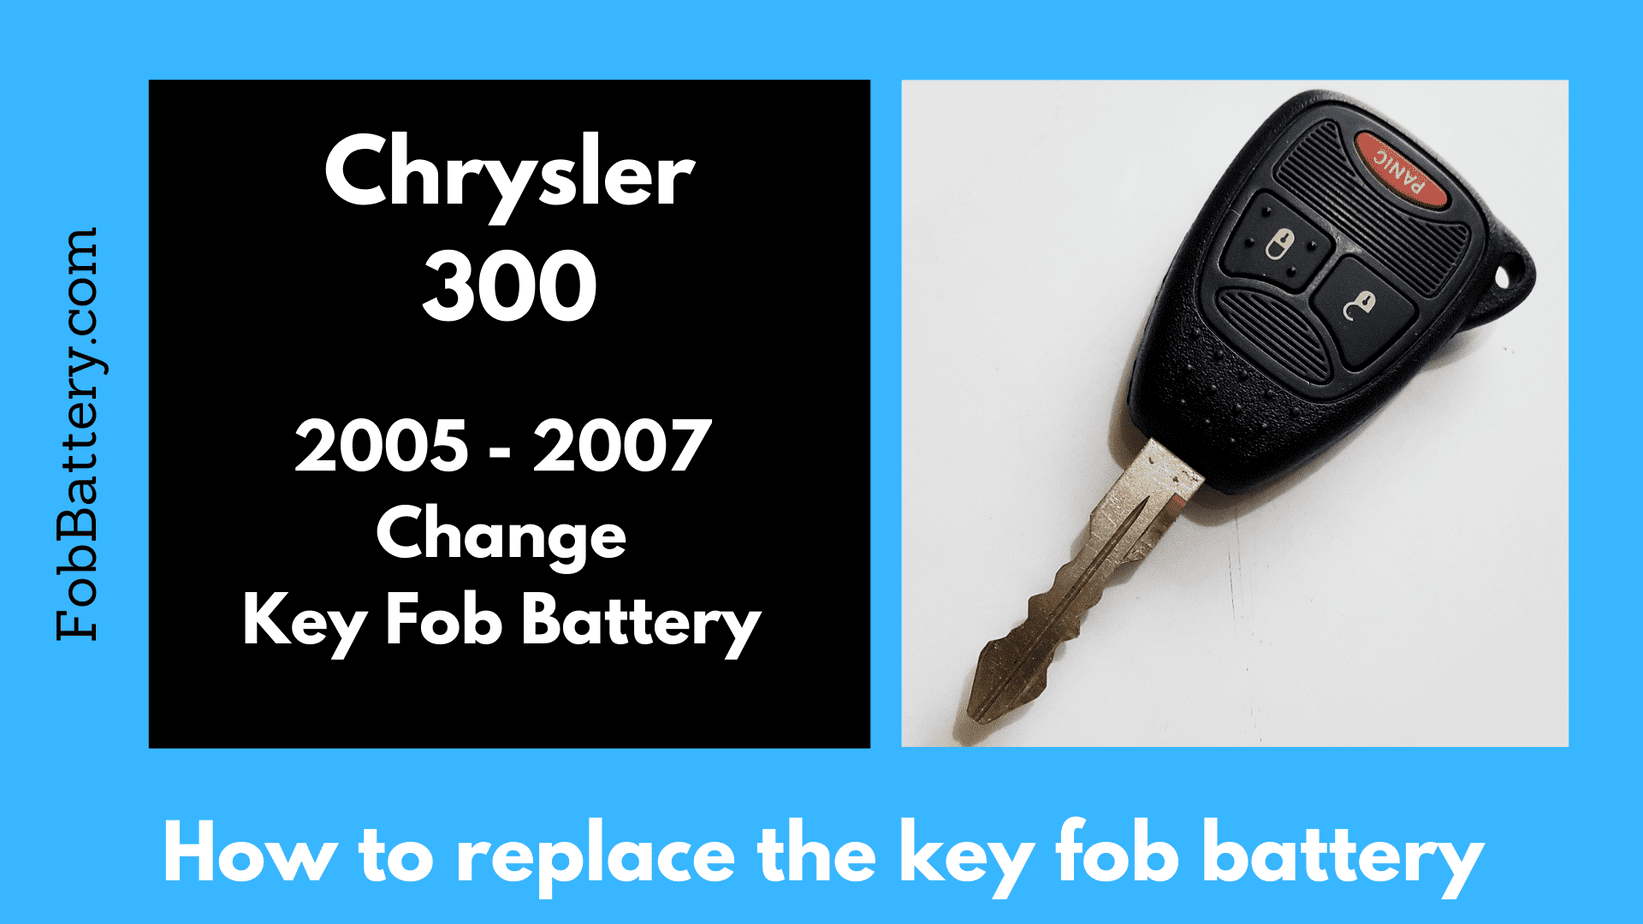 Chrysler 300 key fob battery replacement